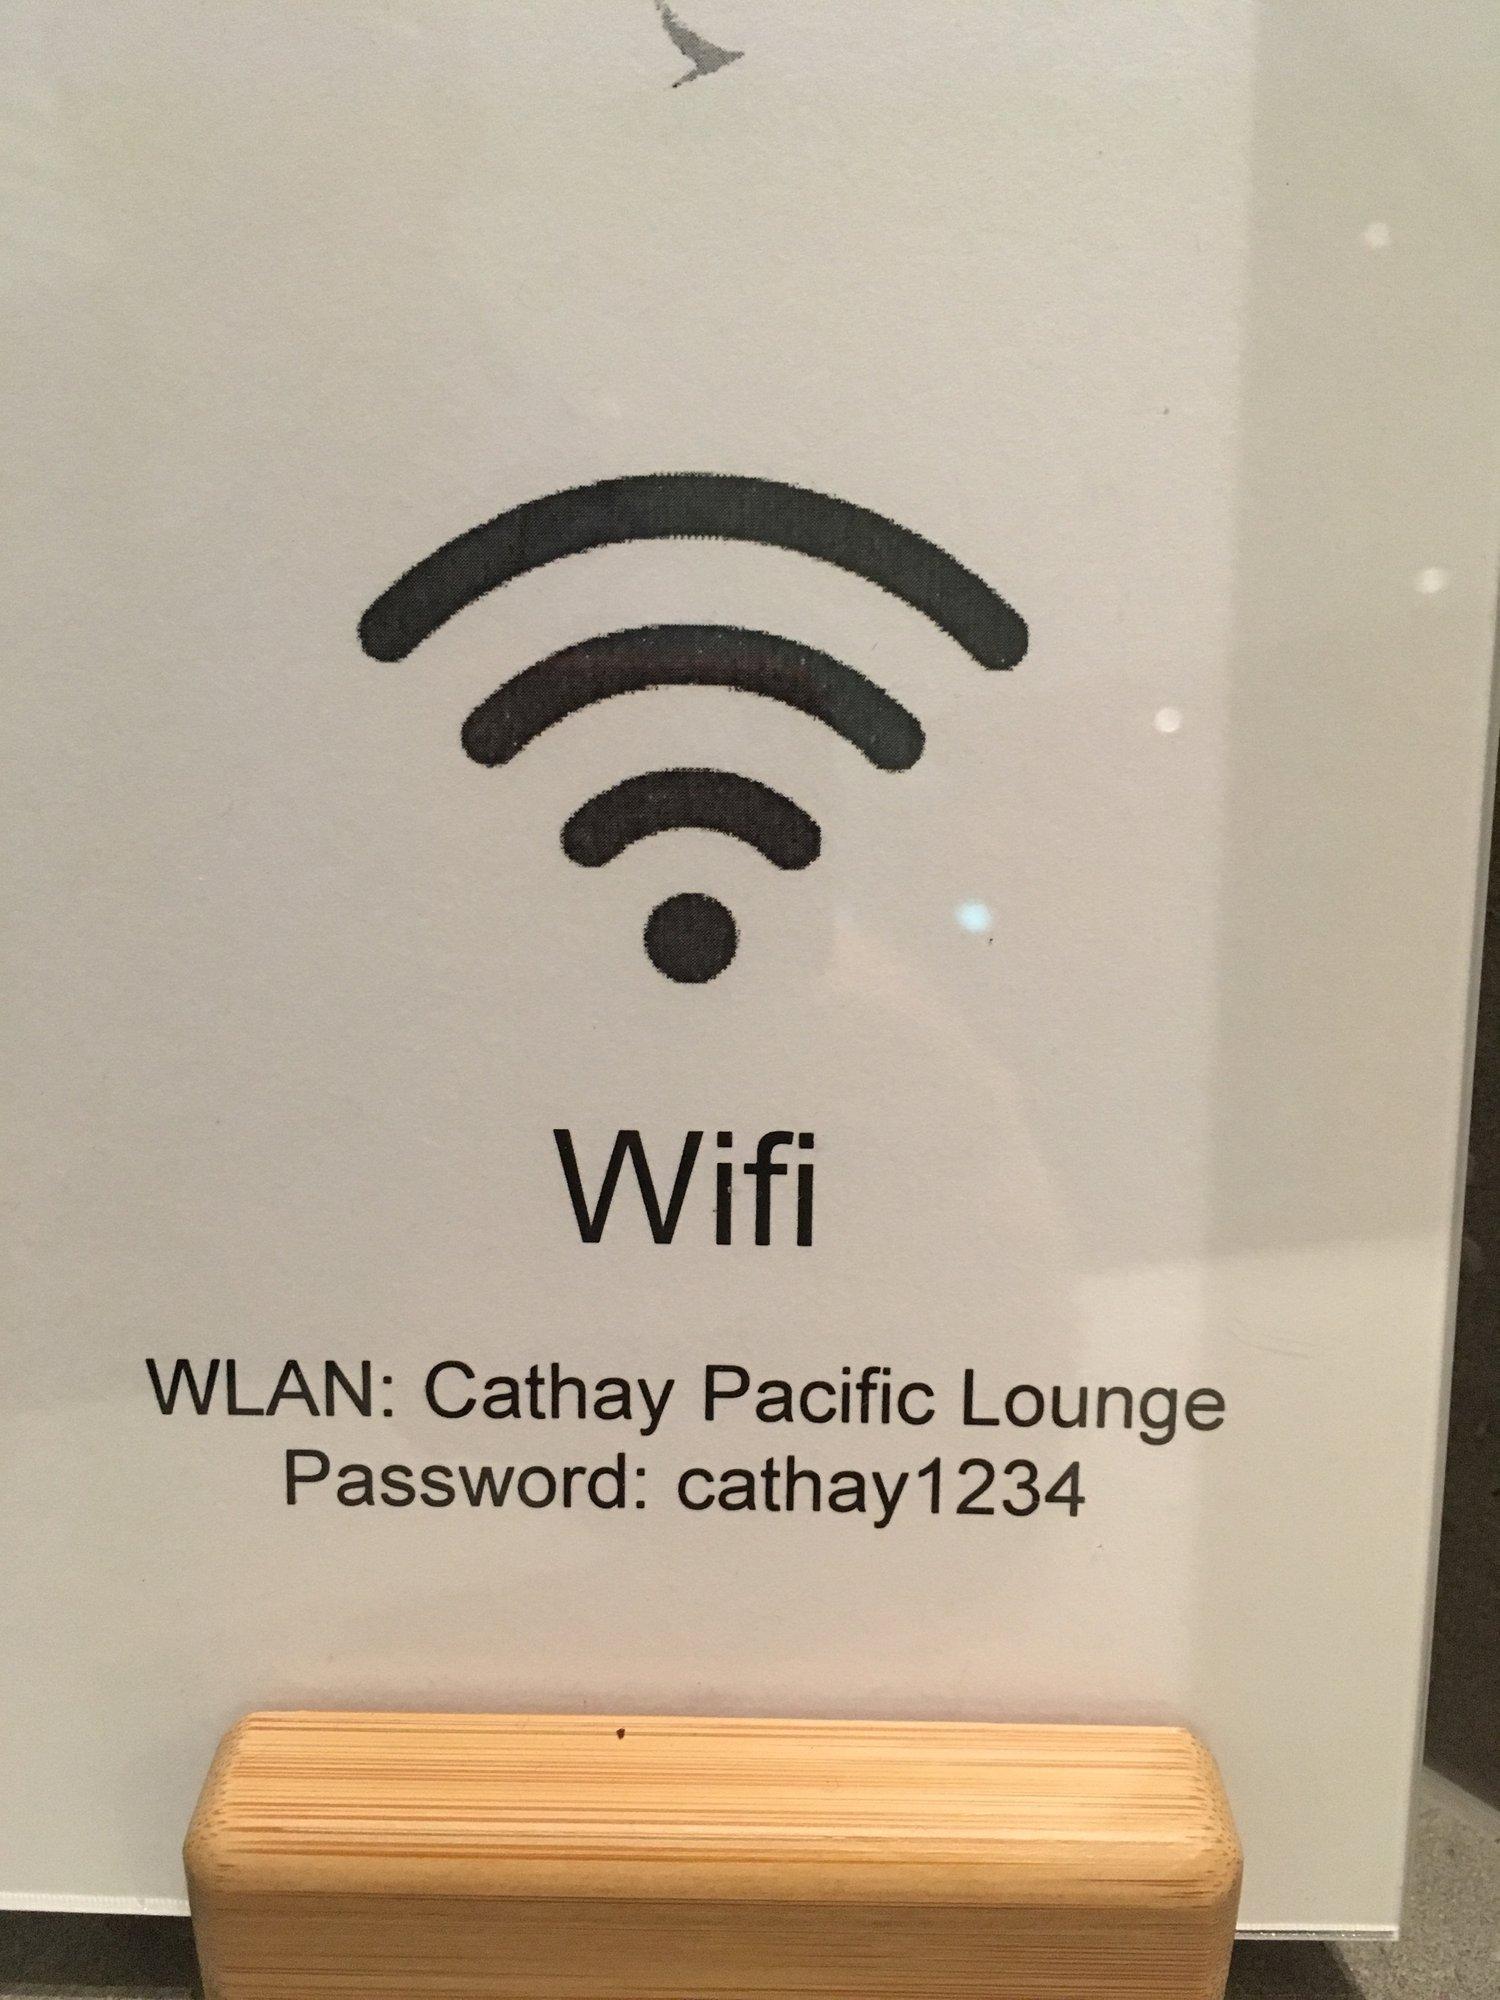 Cathay Pacific Lounge image 13 of 60